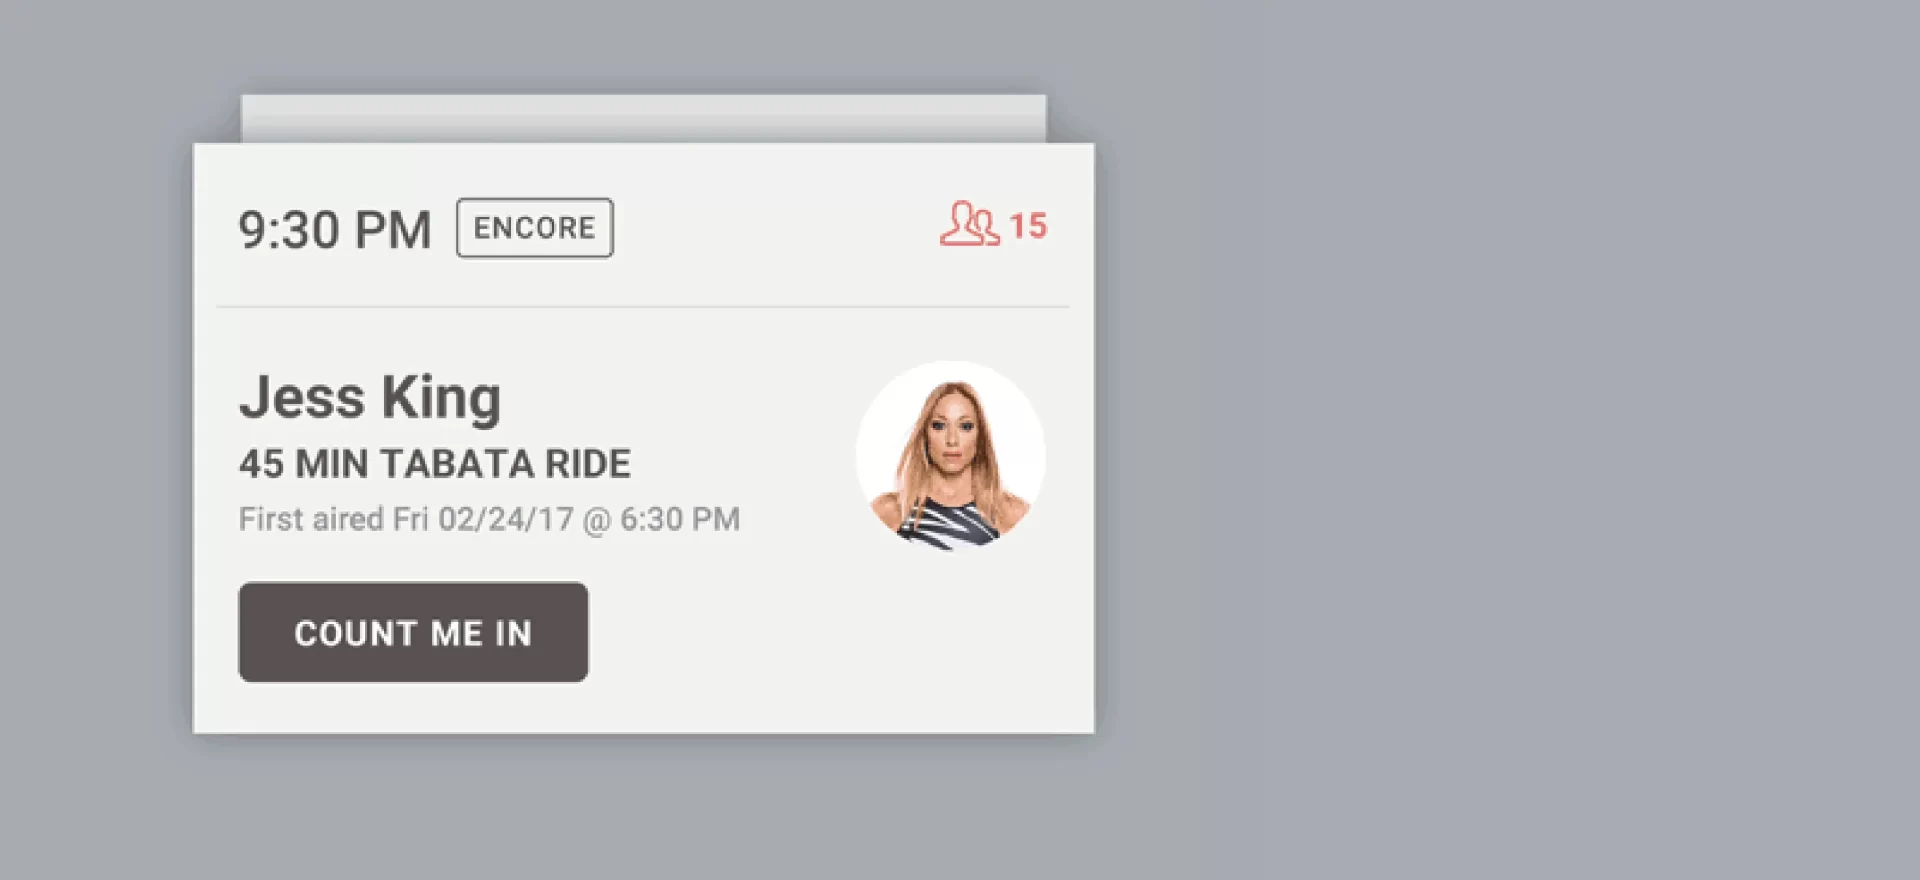 How To Use Encore On Peloton